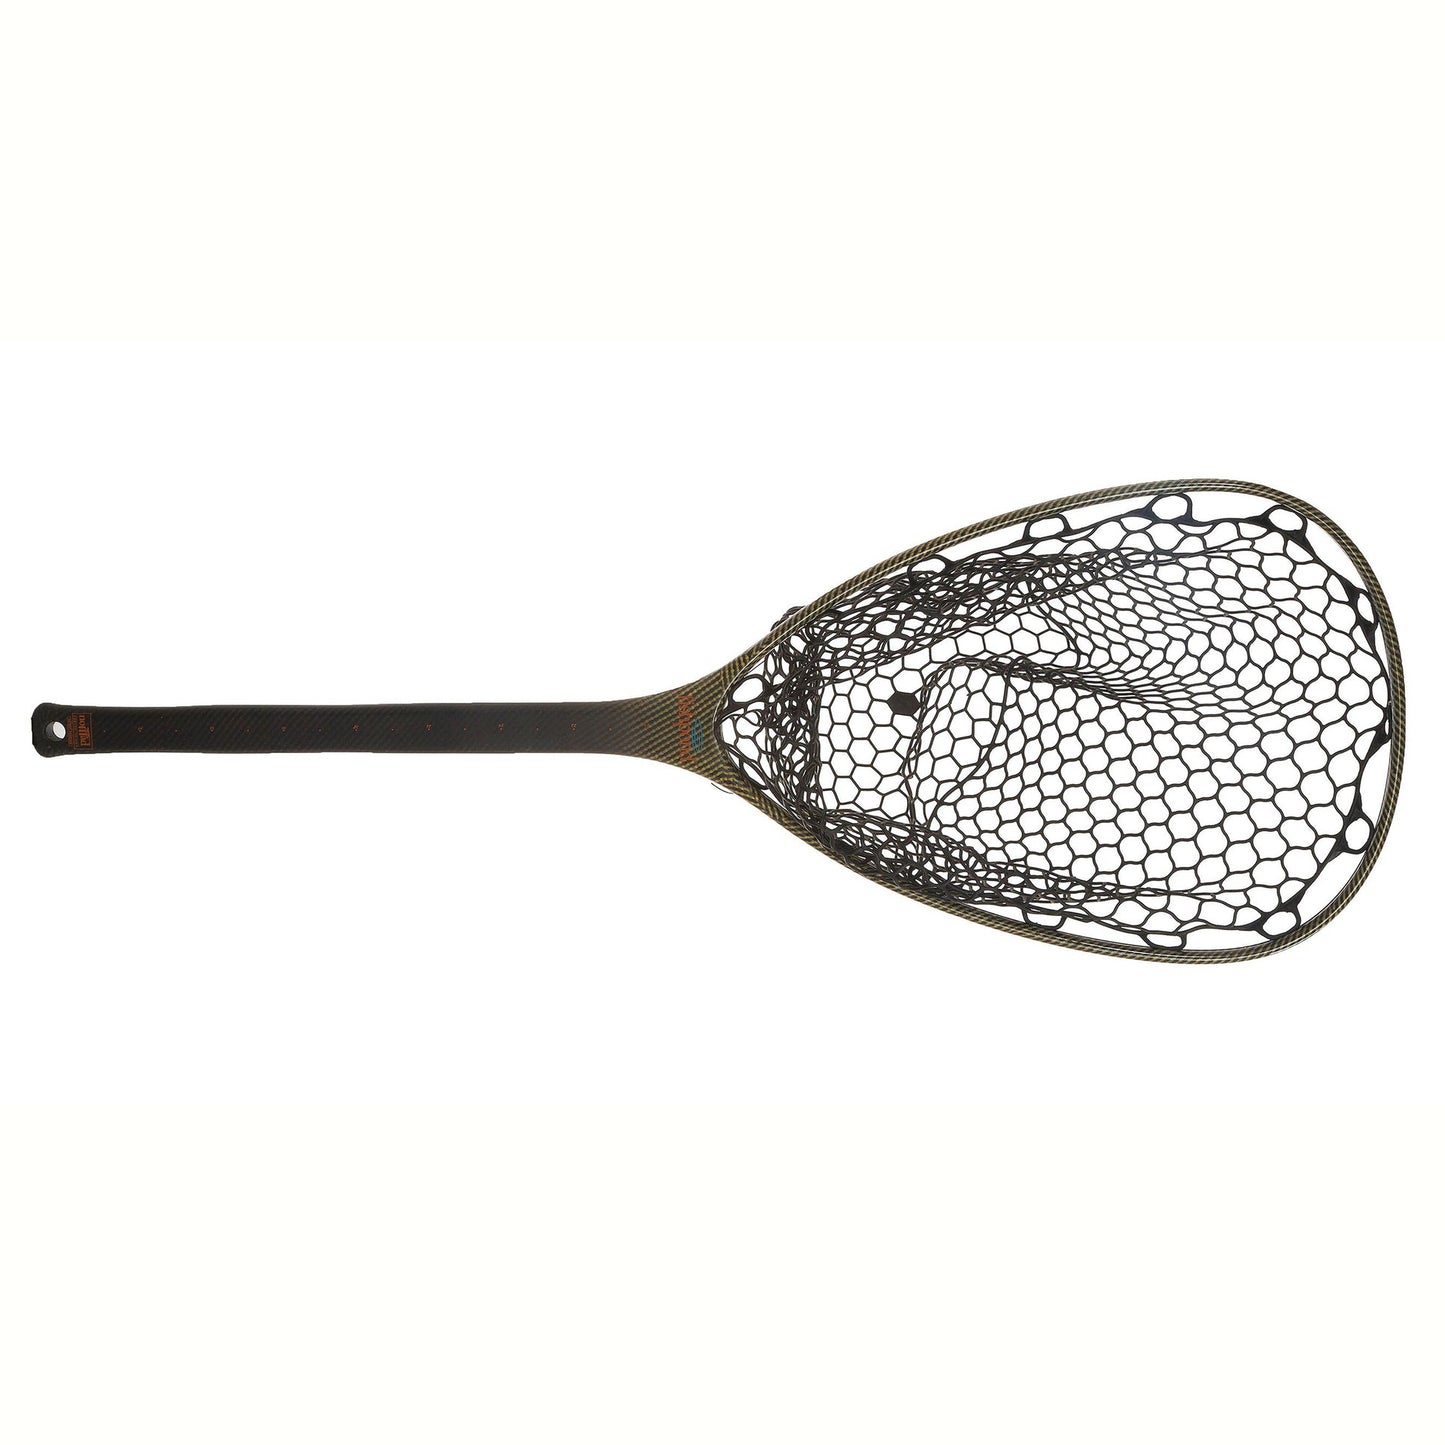 Fishpond Nomad Mid-Length Net – charliesflybox